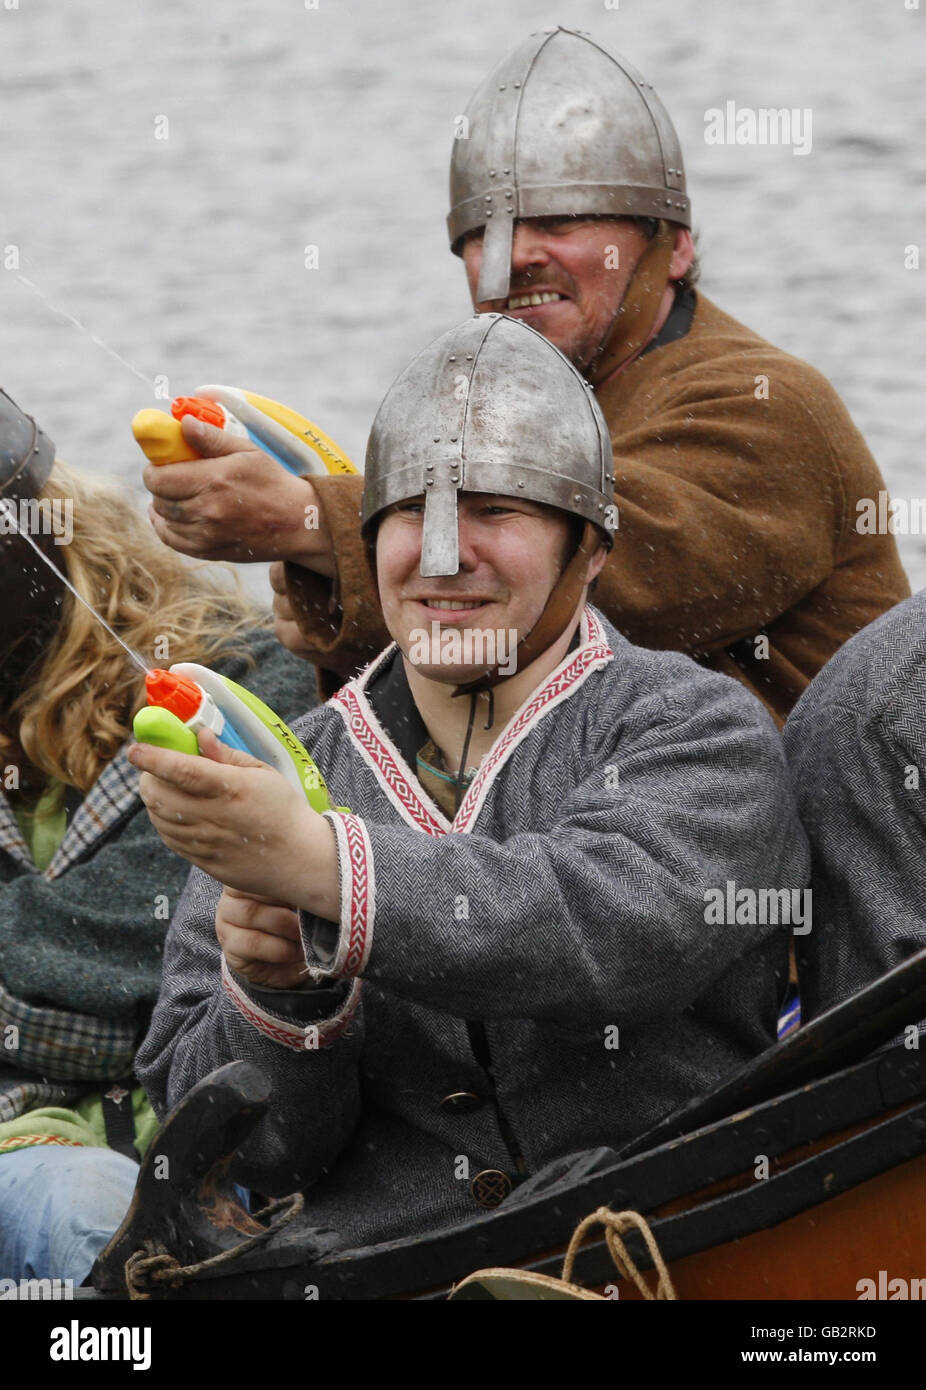 Enthusiasts at the National Living History Festival at Lanark Loch in Scotland re-enact a scene from history as Viking raiders in a longship arrive on the shores of Scotland - the Vikings are armed with water pistols. Stock Photo